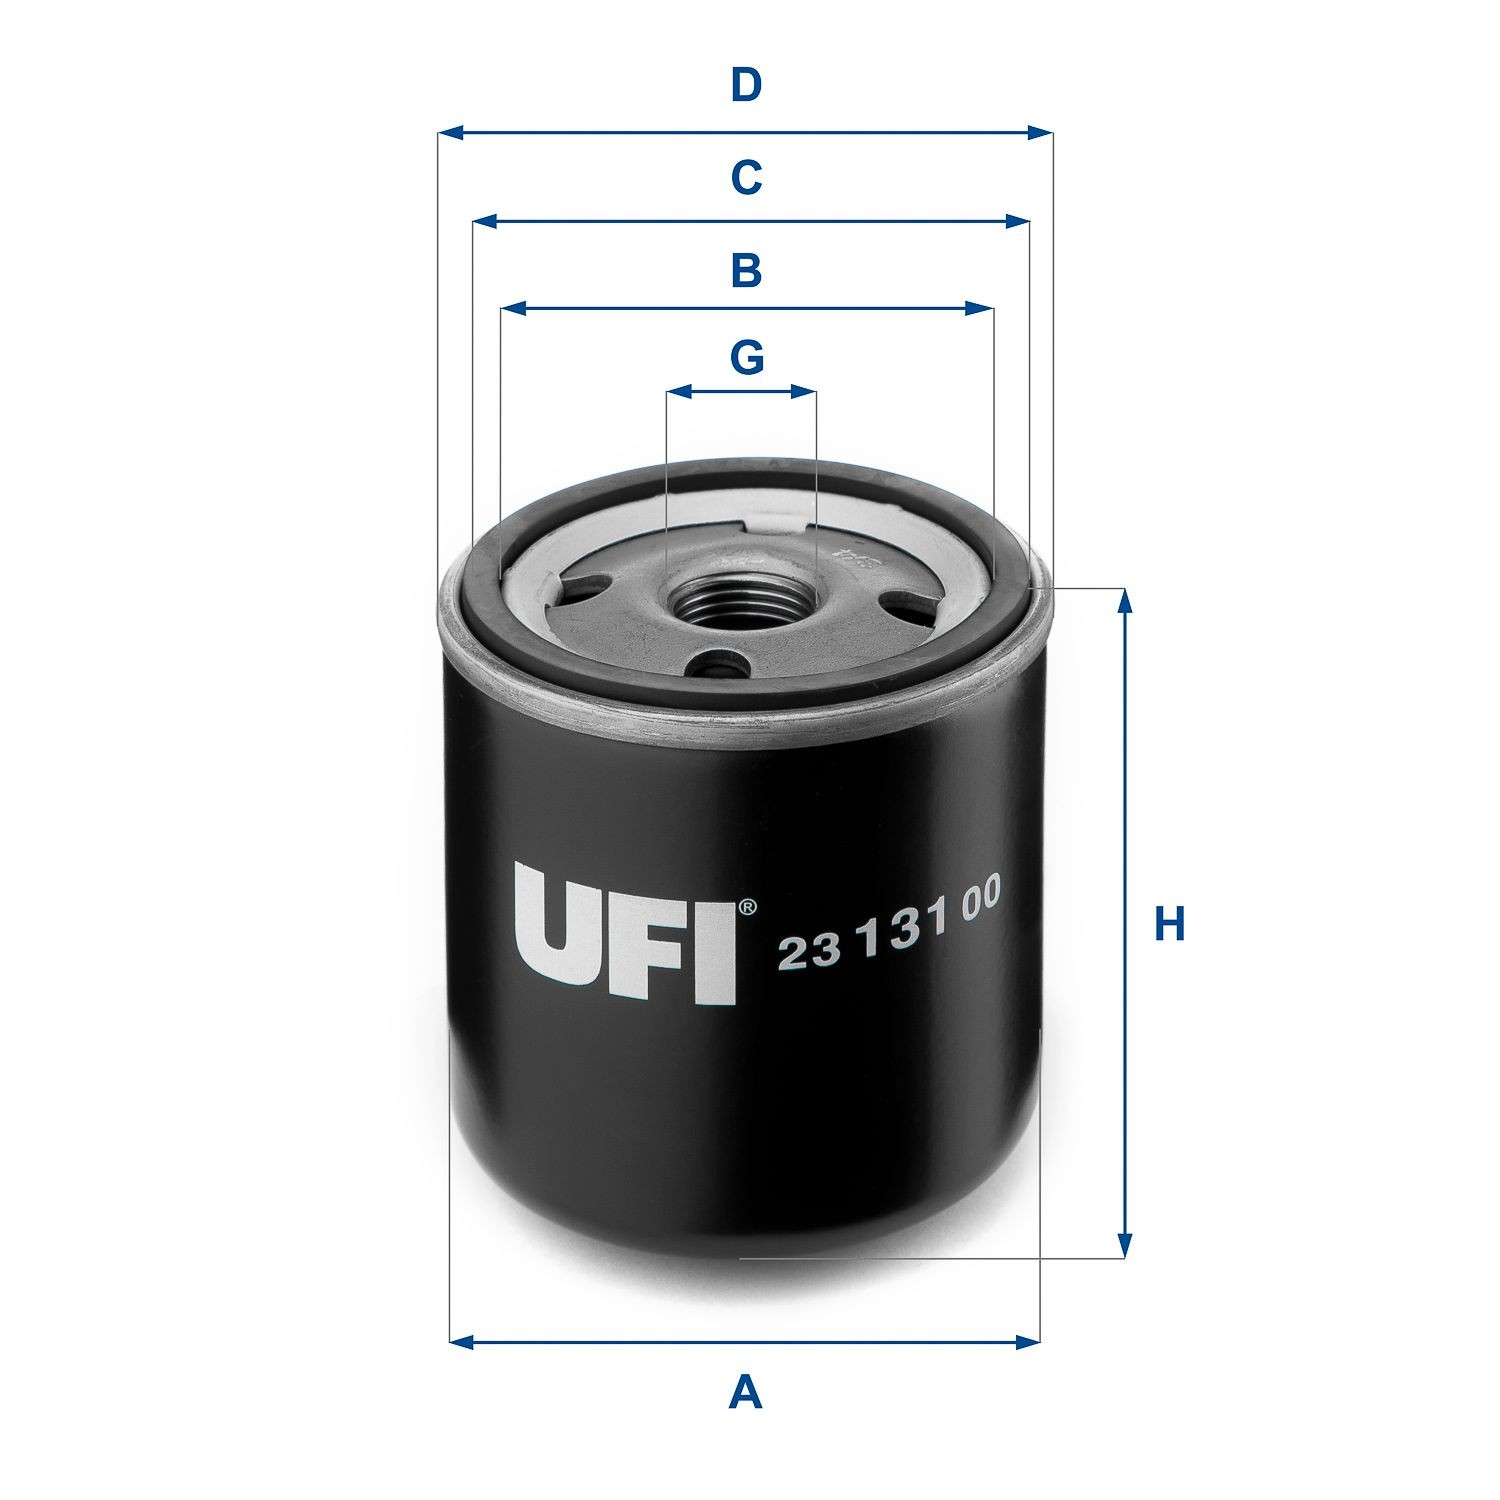 23.131.00 UFI Oil filters JEEP 3/4-16 UNF, with one anti-return valve, Spin-on Filter